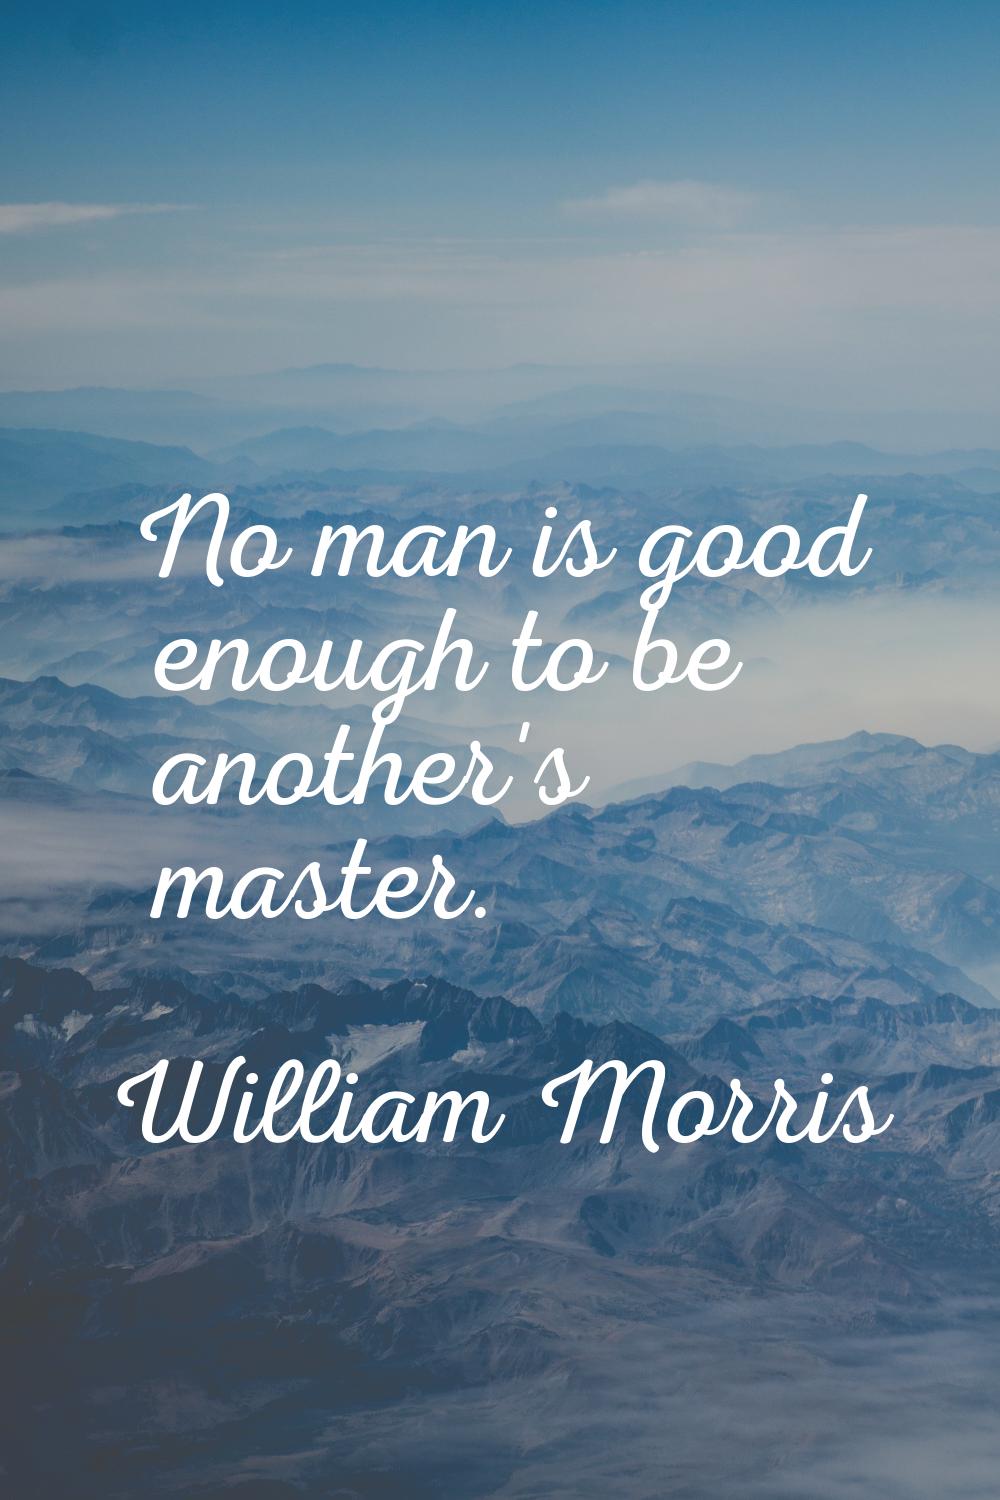 No man is good enough to be another's master.